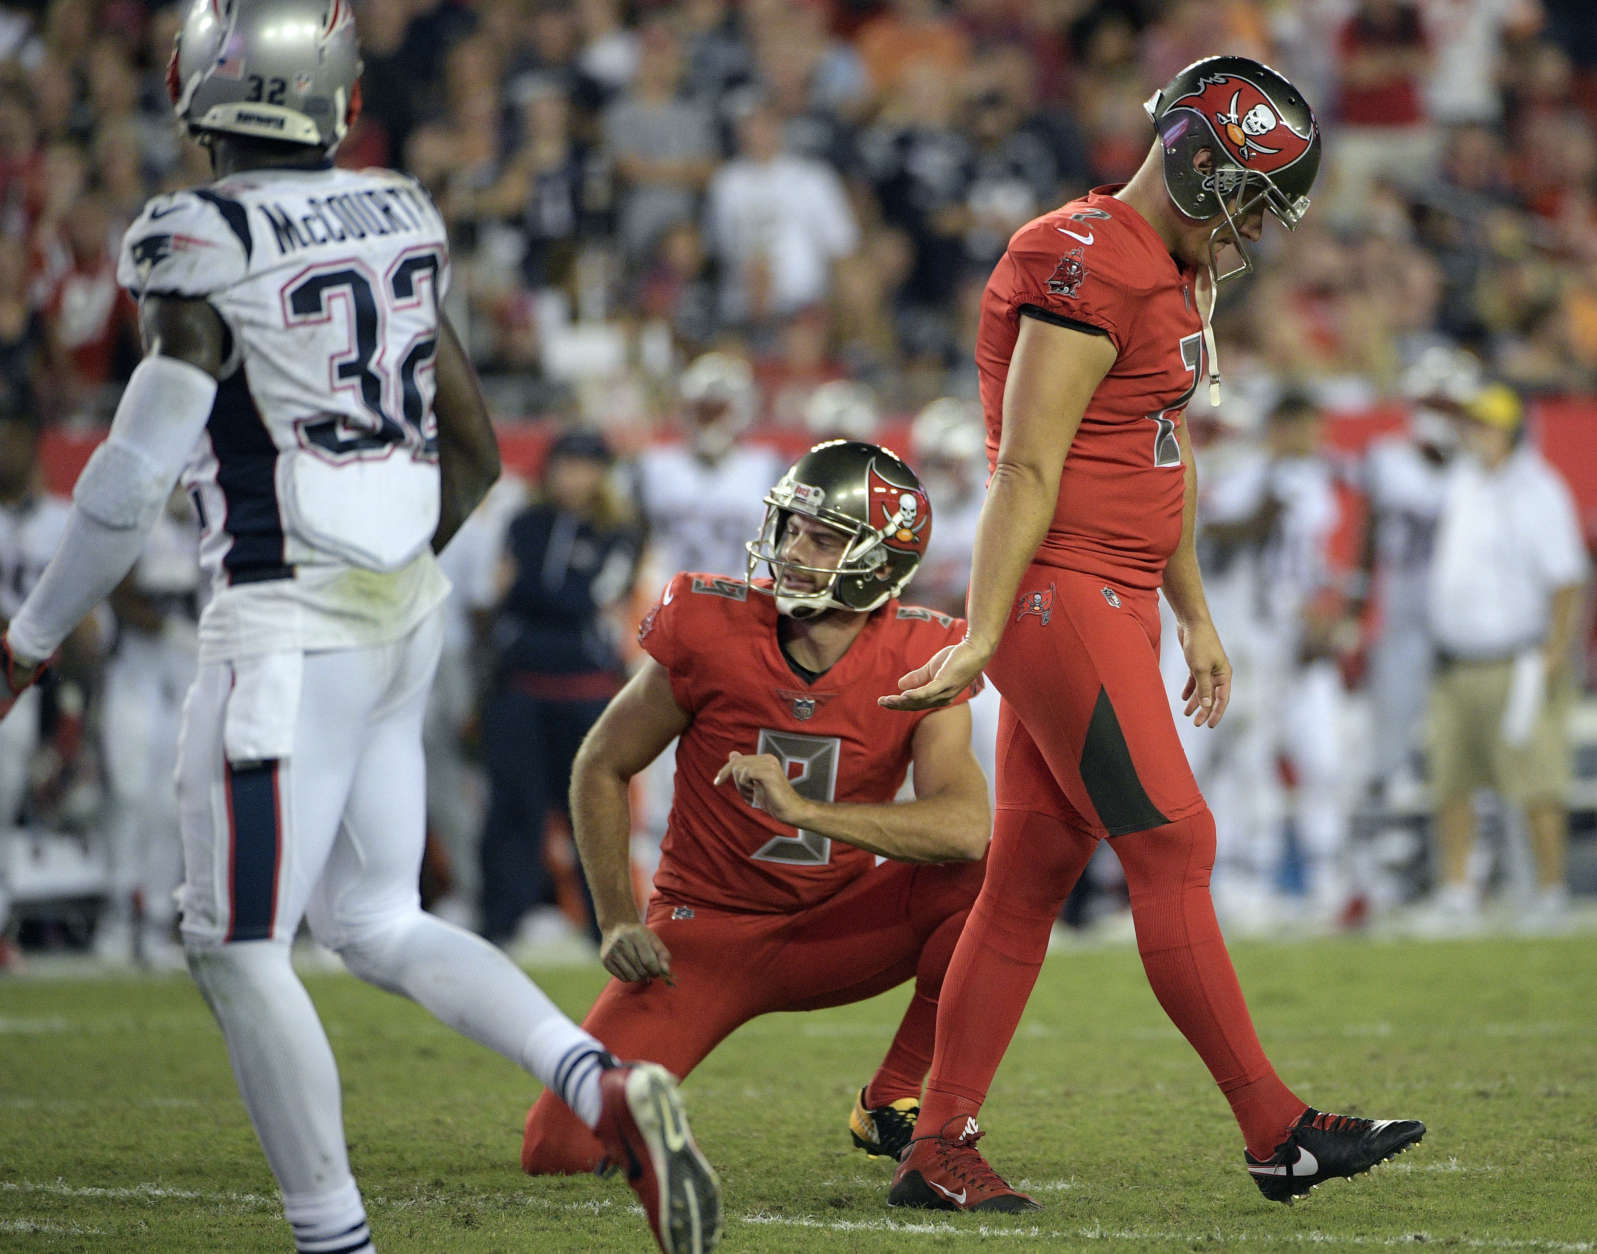 Tampa Bay Buccaneers kicker Nick Folk (2) reacts after missing a field goal against the New England Patriots during the fourth quarter of an NFL football game against the New England Patriots Thursday, Oct. 5, 2017, in Tampa, Fla. Holding for the Buccaneers is Bryan Anger. (AP Photo/Phelan Ebenhack)